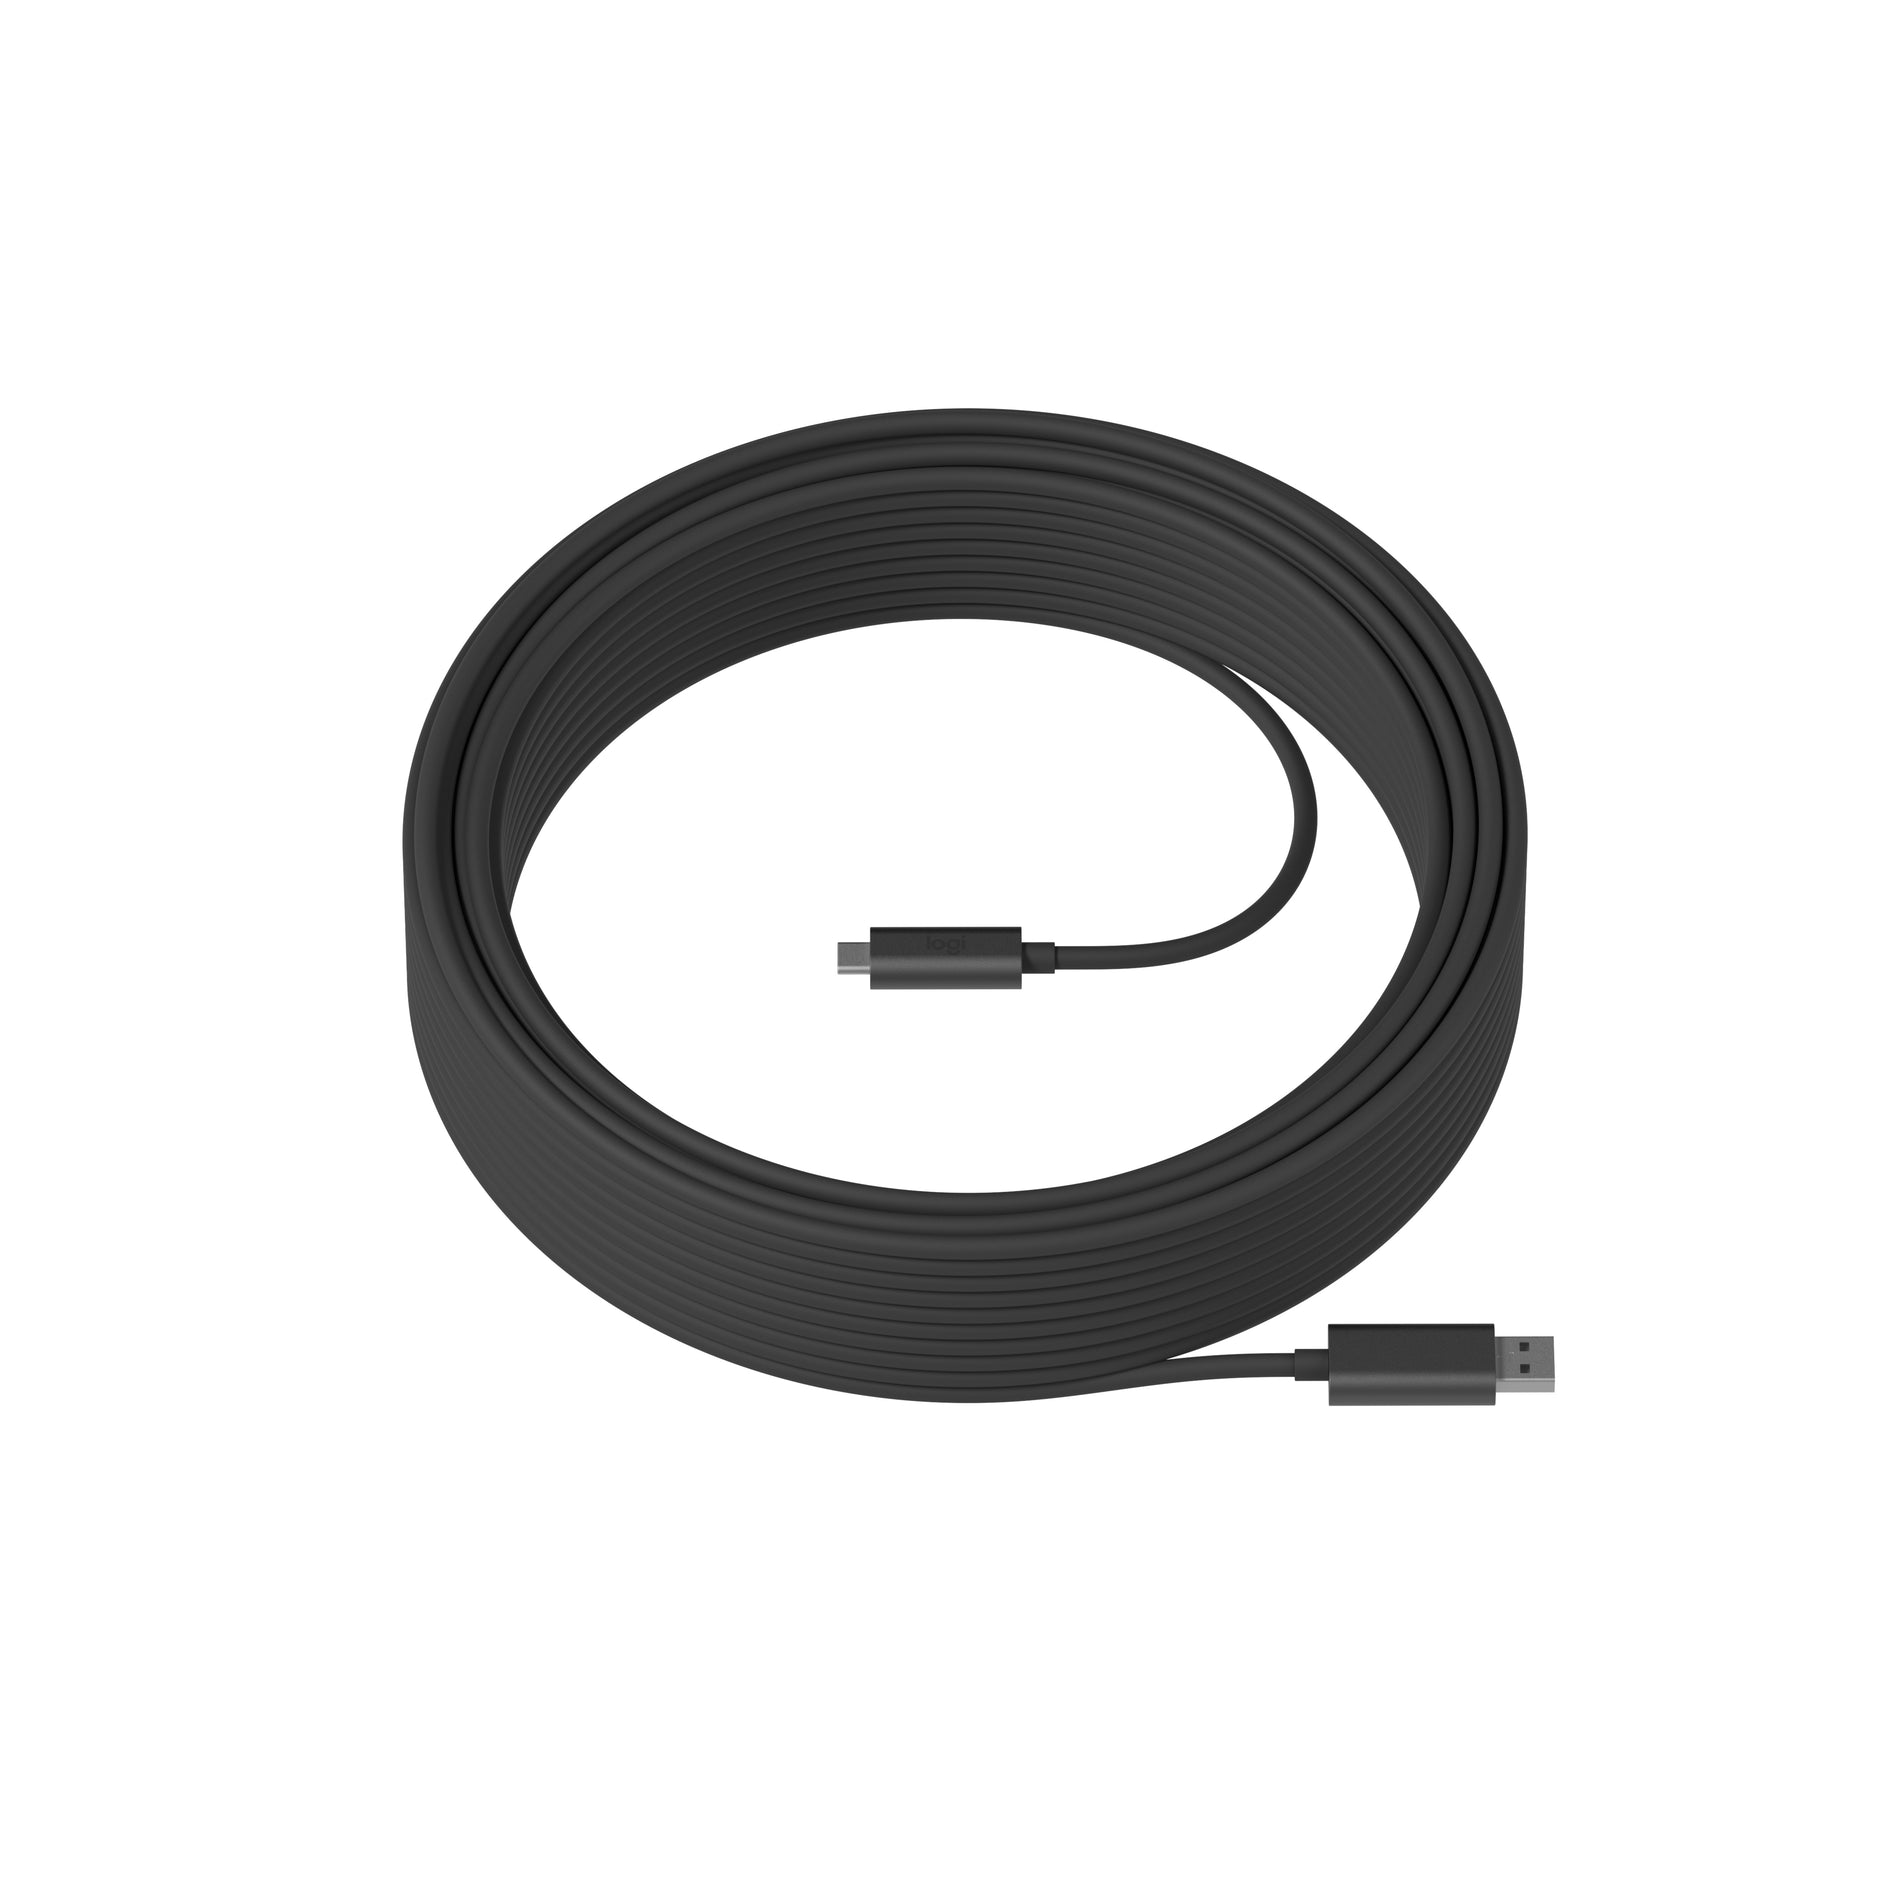 Logitech 939-001802 Strong USB 25m Active Optical USB 3.2 Cable, 82 ft Bendable Fiber Optic Data Transfer Cable